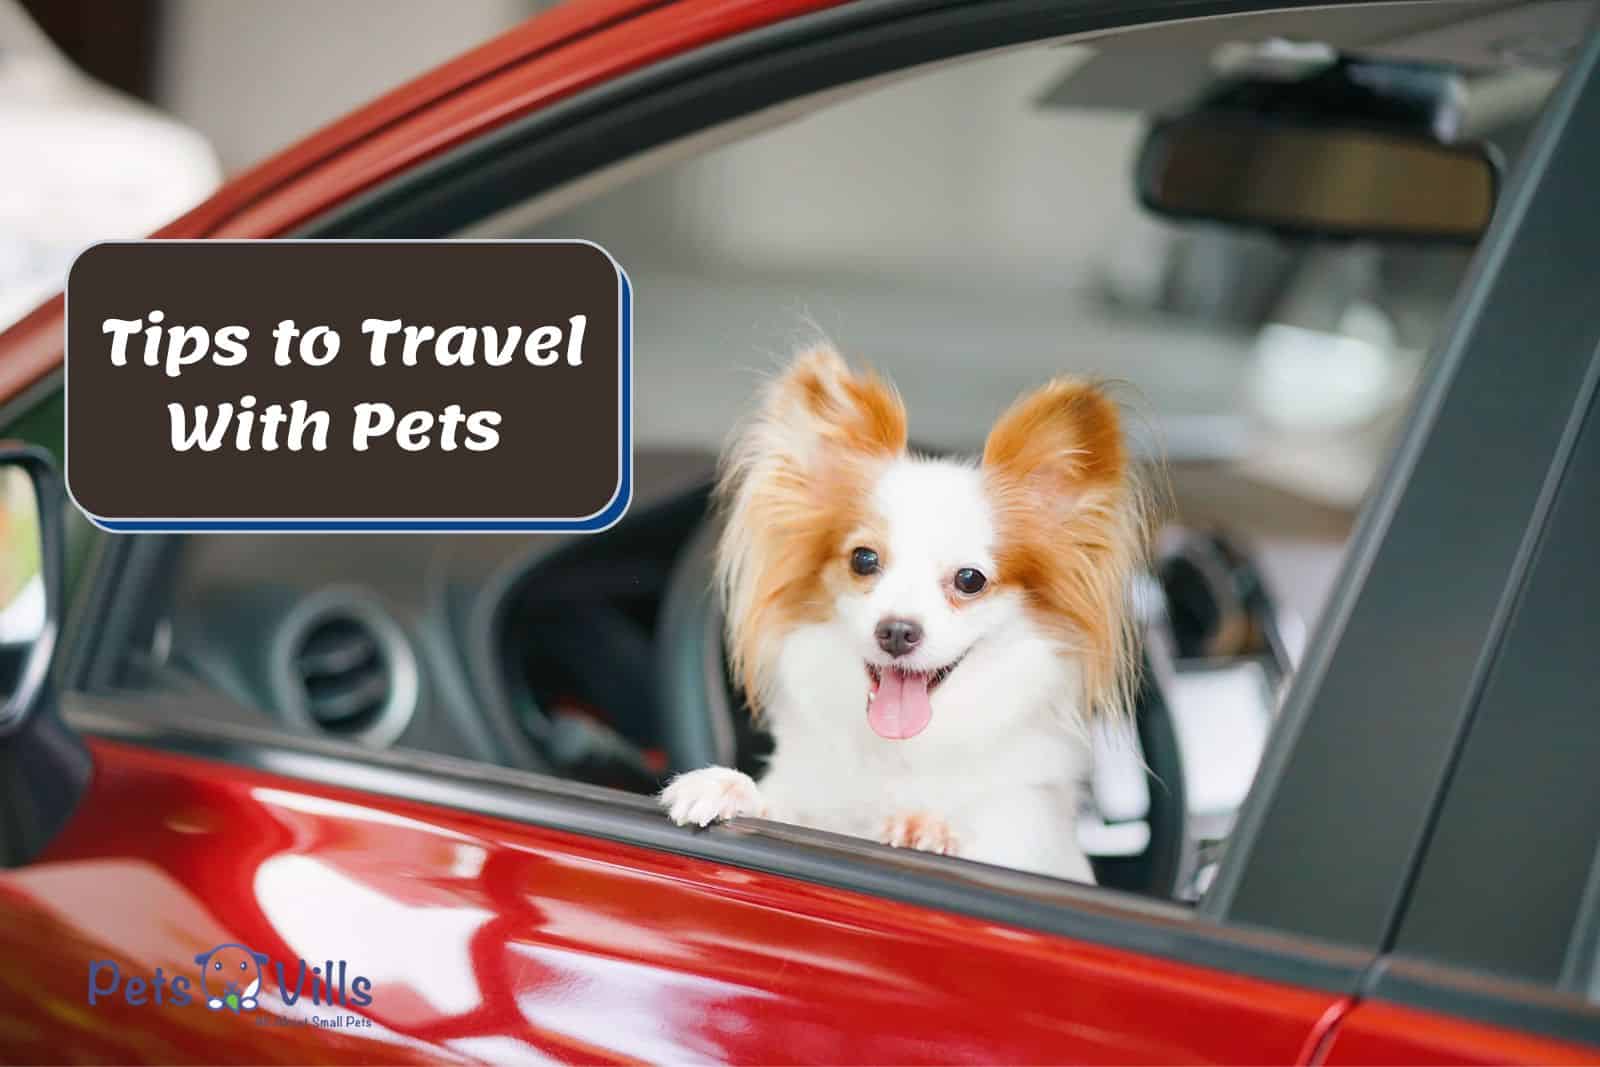 cute dog inside a car posing beside Tips to Travel With Pets